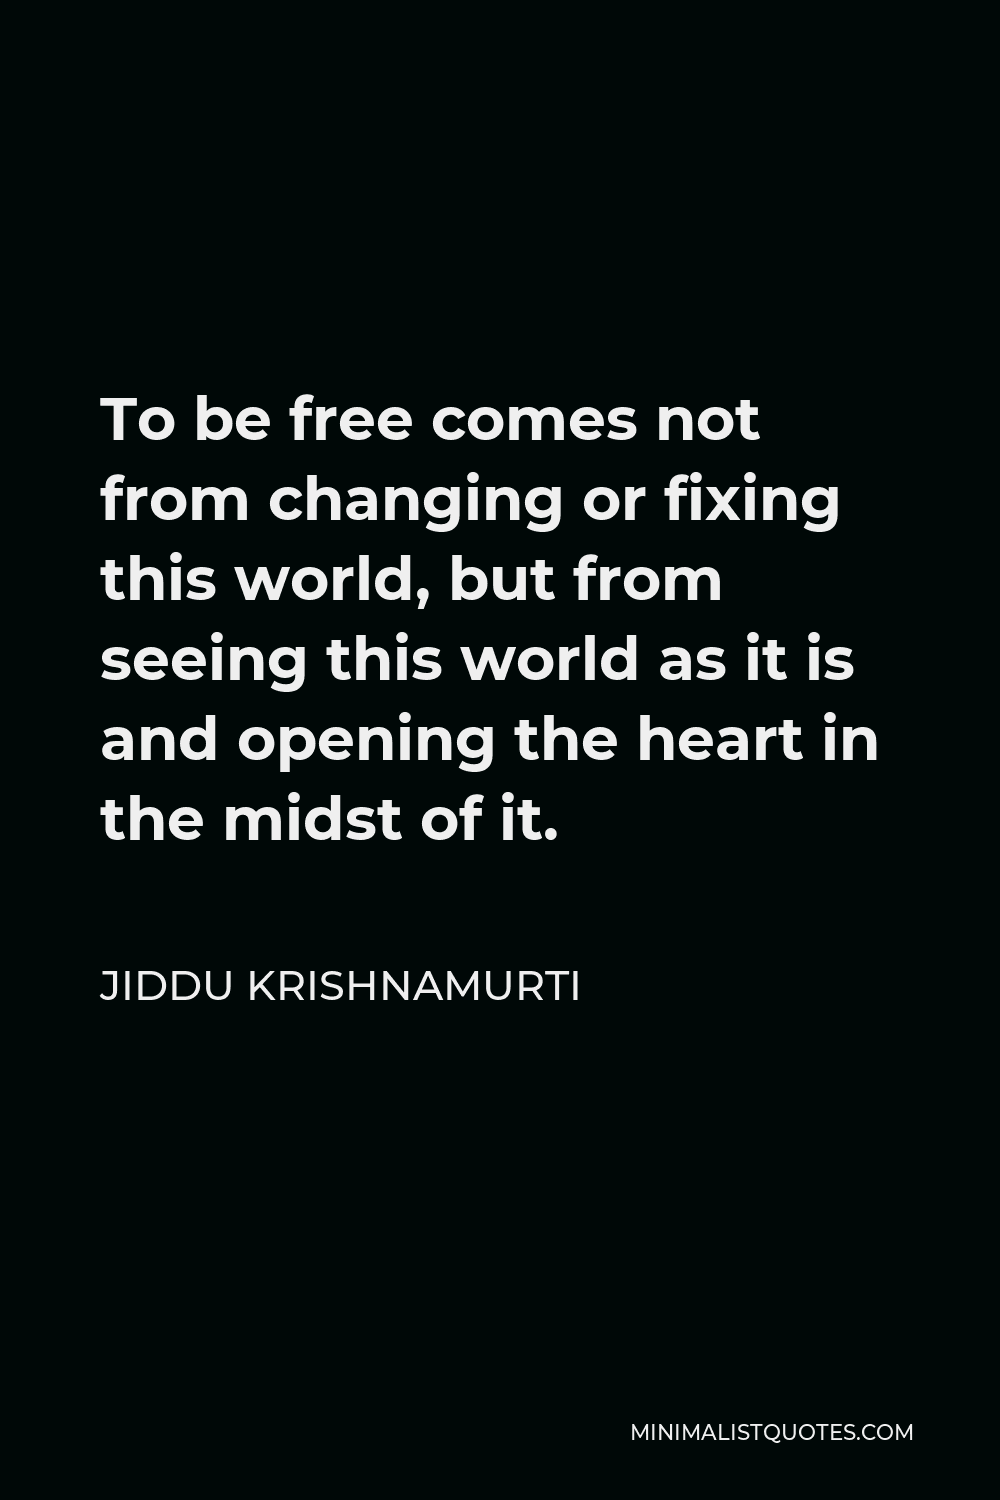 Jiddu Krishnamurti Quote - To be free comes not from changing or fixing this world, but from seeing this world as it is and opening the heart in the midst of it.